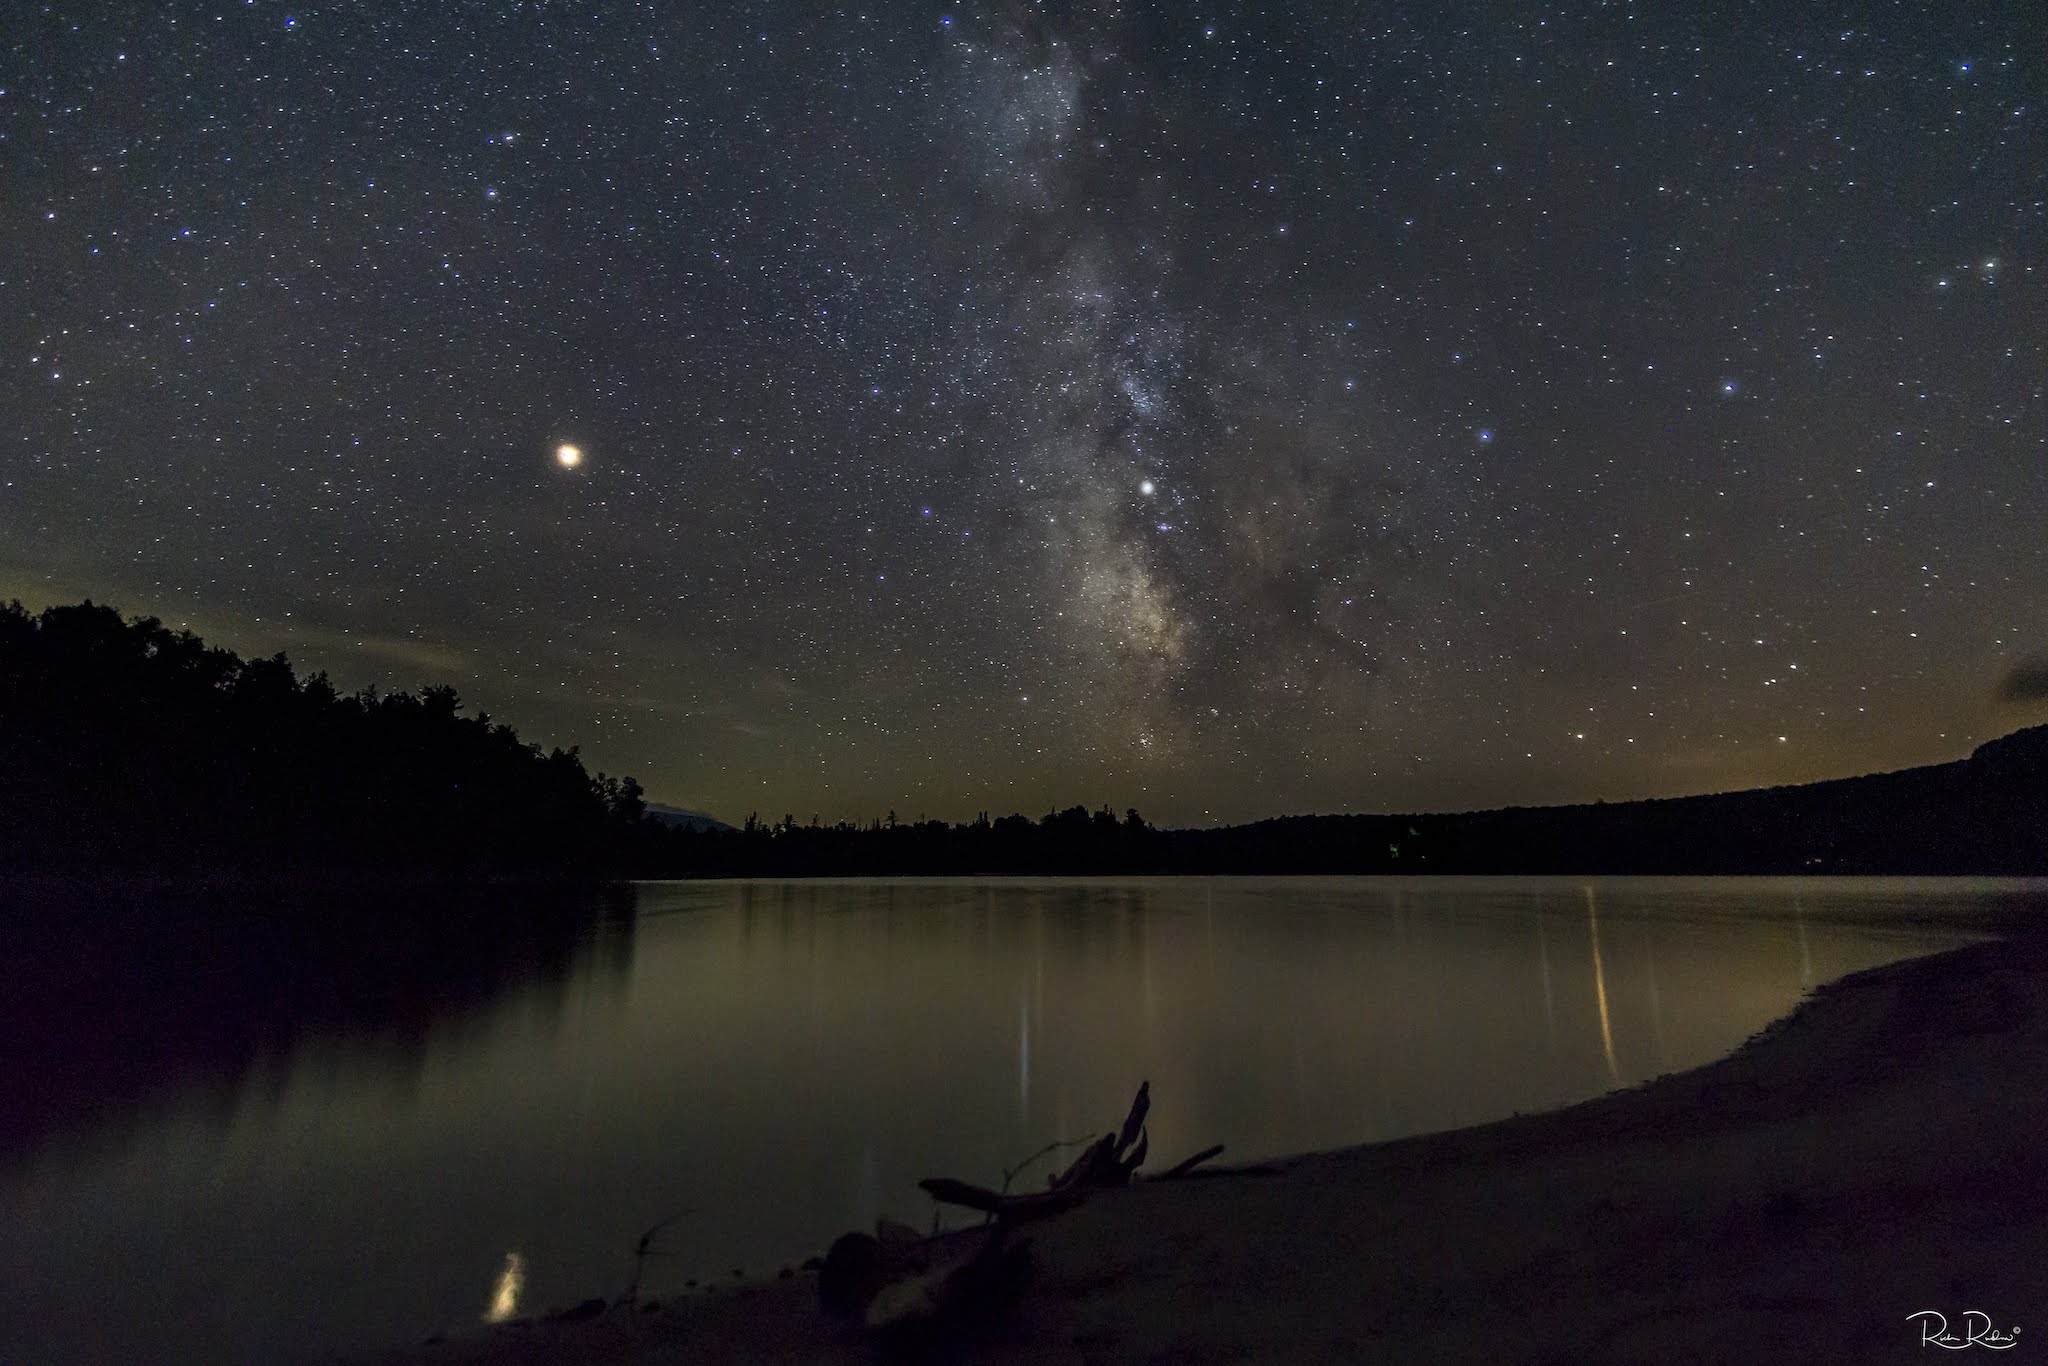 Starry night sky over a lake in Maine